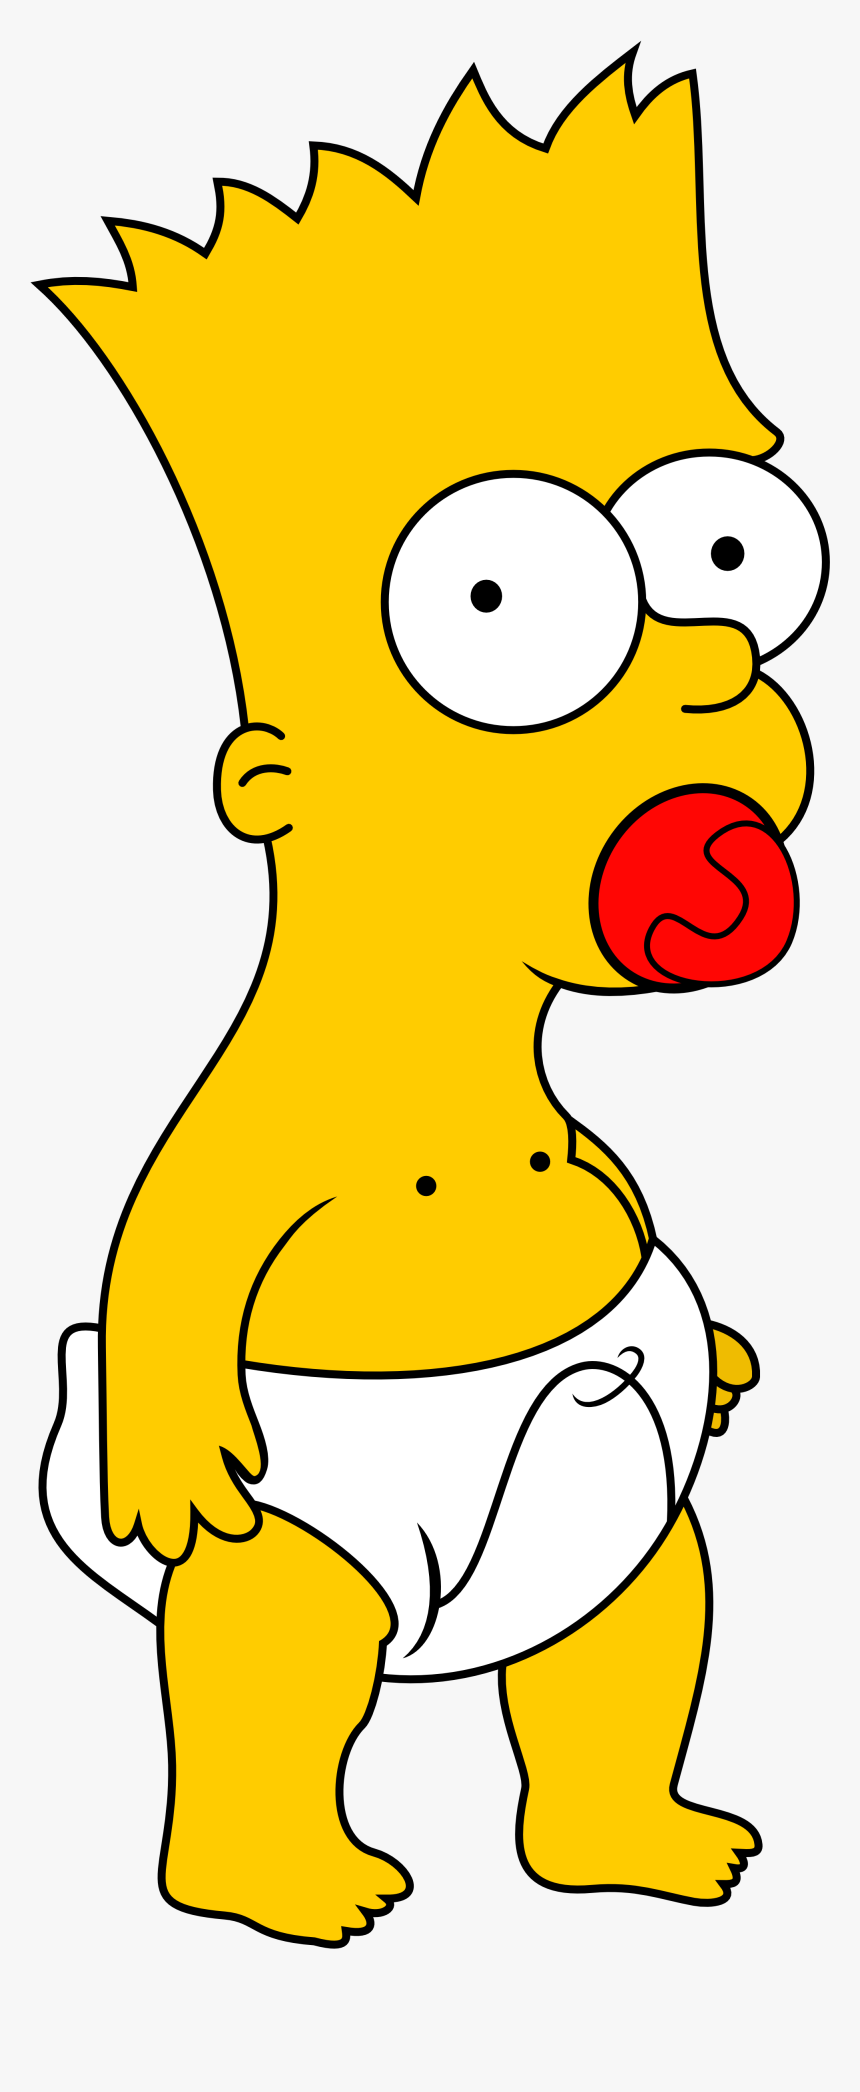 Bart Simpson Lisa Simpson Homer Simpson Maggie Simpson - Simpsons Bart As A Baby, HD Png Download, Free Download